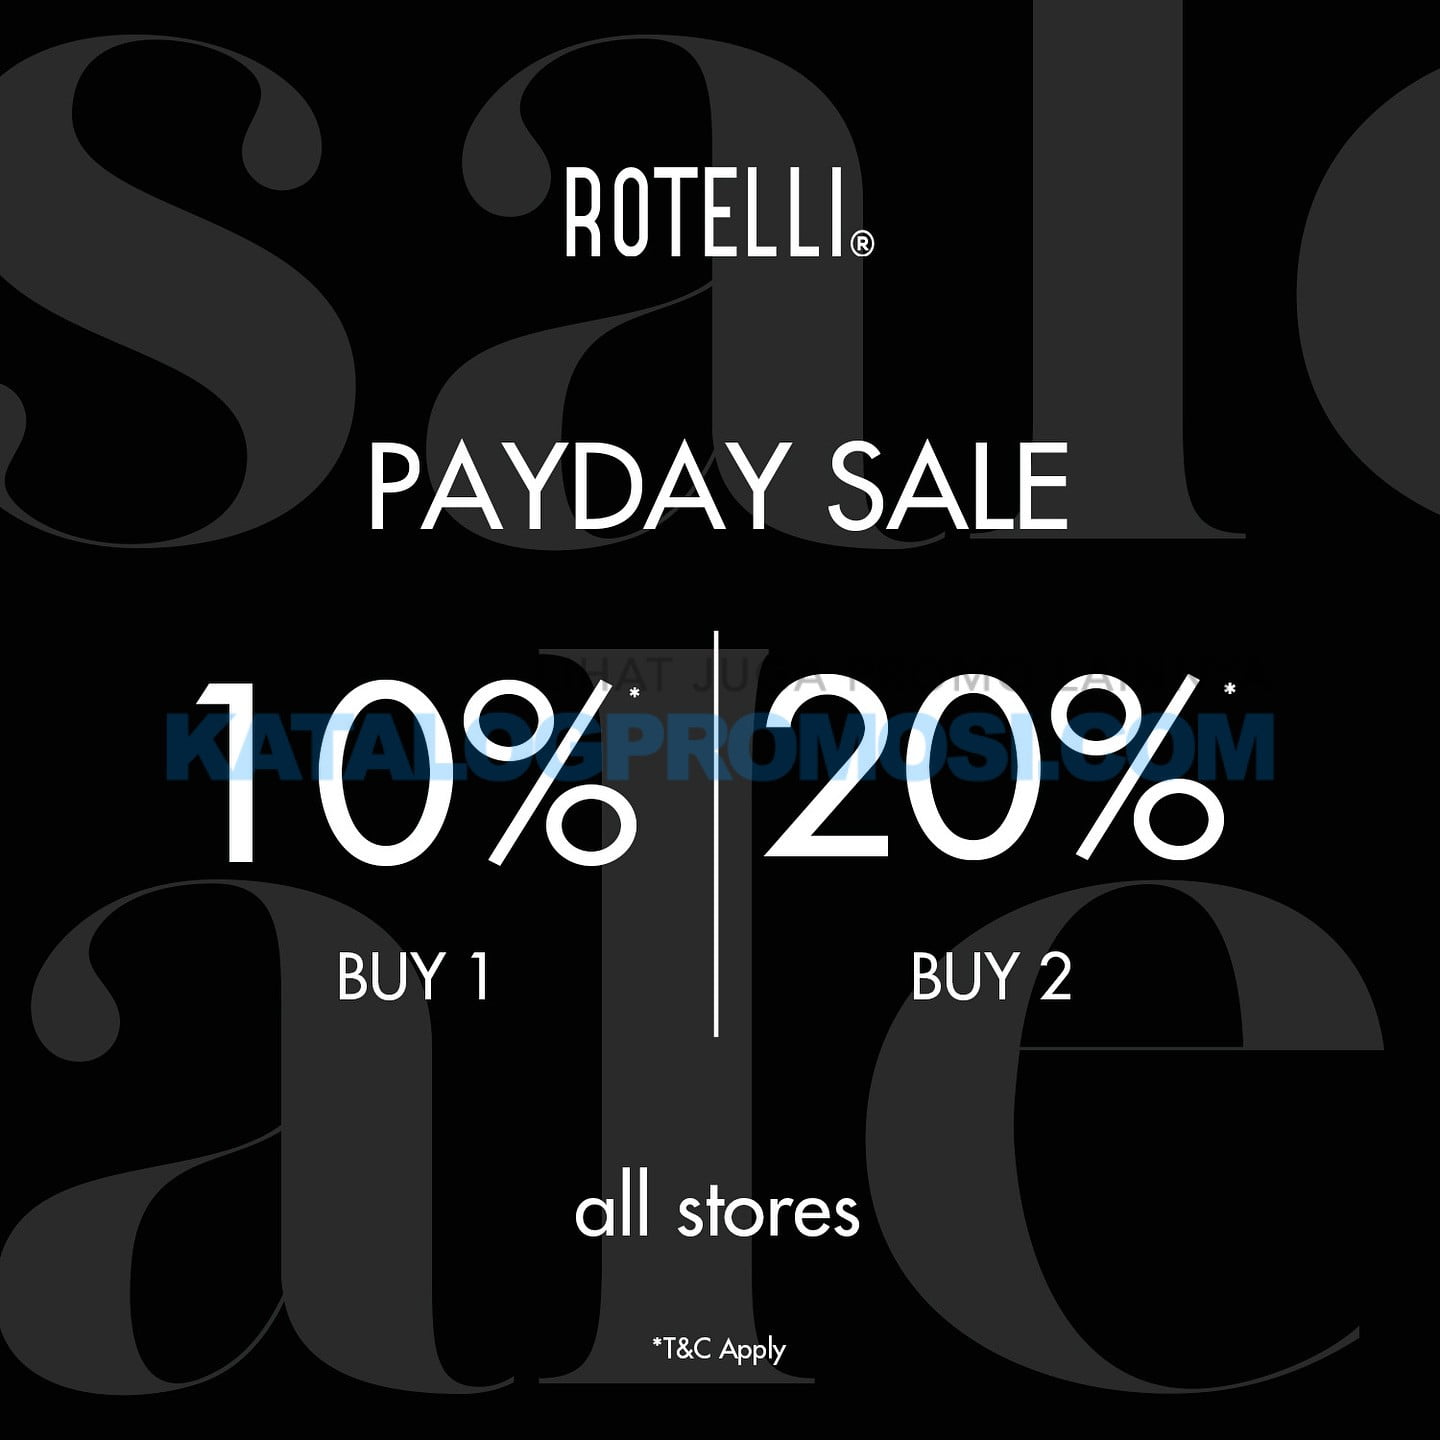 Promo ROTELLI PAYDAY - SPECIAL DISCOUNT up to 20% off